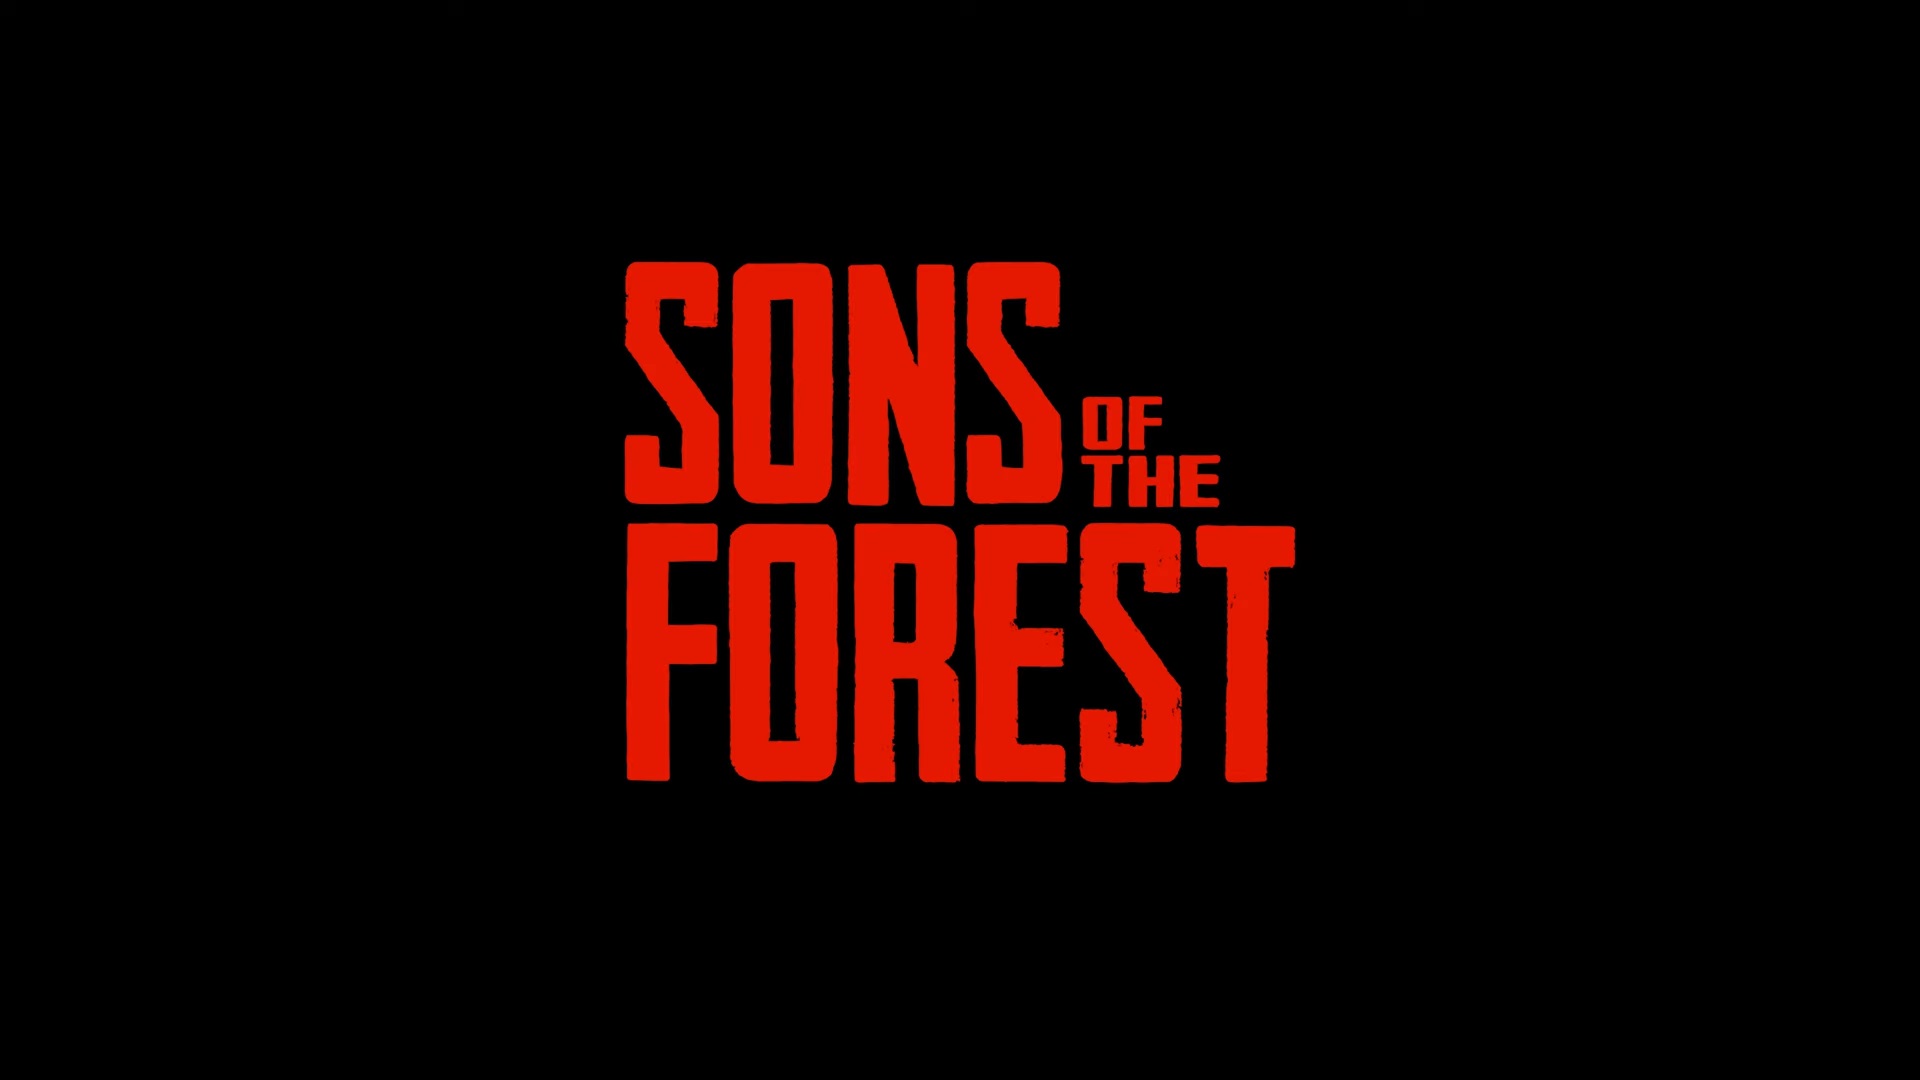 Оф ве найт. Sons of the Forest. Игра sons of the Forest. The Forest логотип. Sons of the Forest лого.